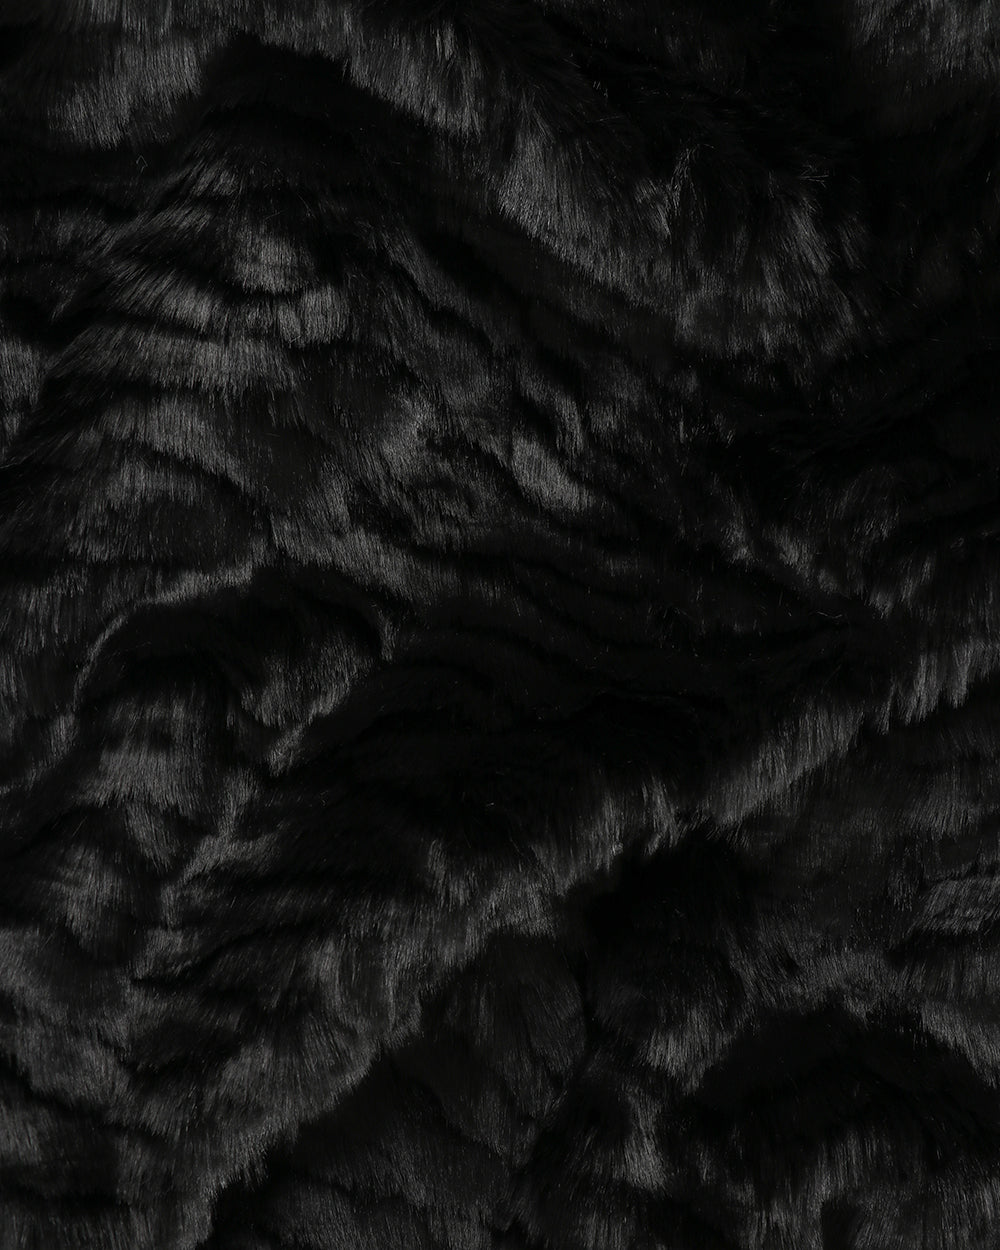 Heirloom Black Tiger Throw Rug Blanket in Faux Fur is available from Make Your House A Home Premium Stockist. Furniture Store Bendigo, Victoria. Australia Wide Delivery.